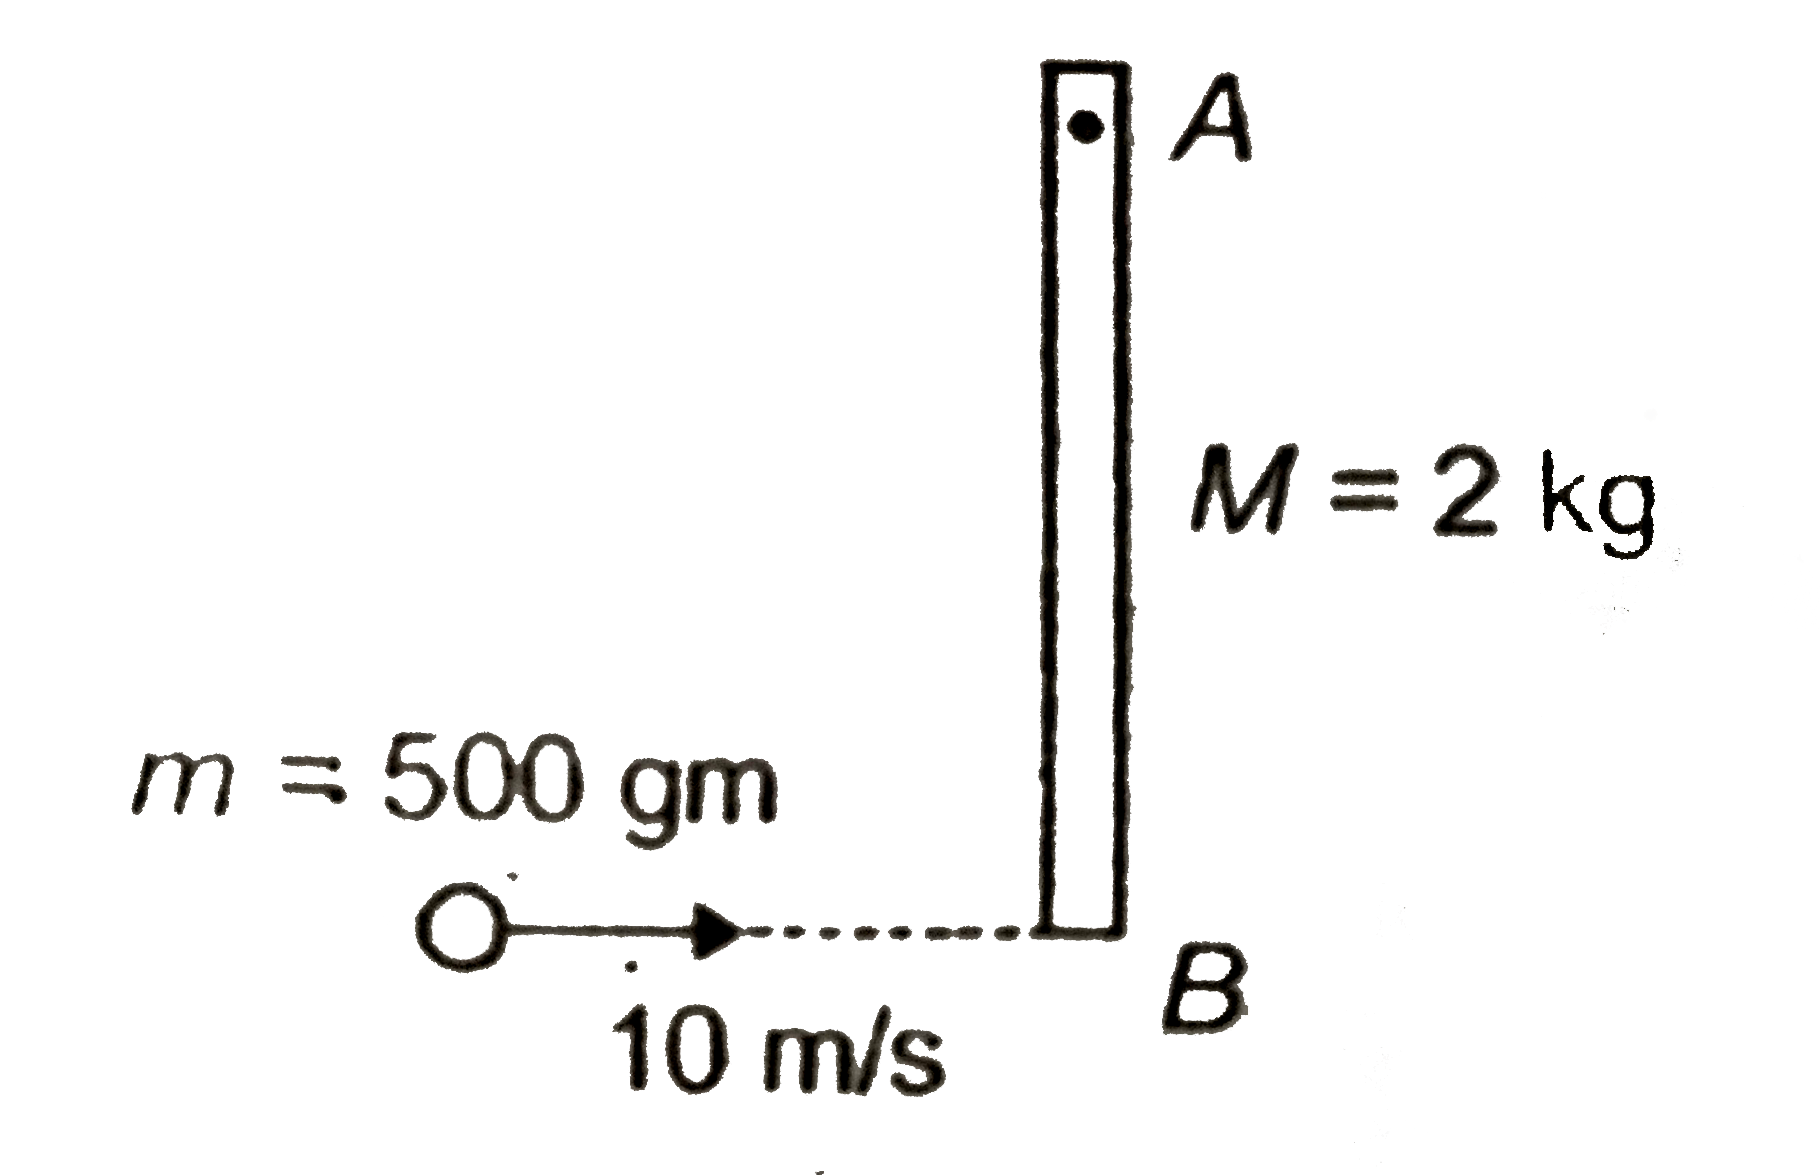 A rod of mass 2kg and length 1m is pivoted at one end A and kept on a smooth surface. A particle of mass 500gm strikes the other end B of the rod and sticks to the rod. If particle was moving with the speed of 20m//s, what is the angular speed of the rod after collision ?